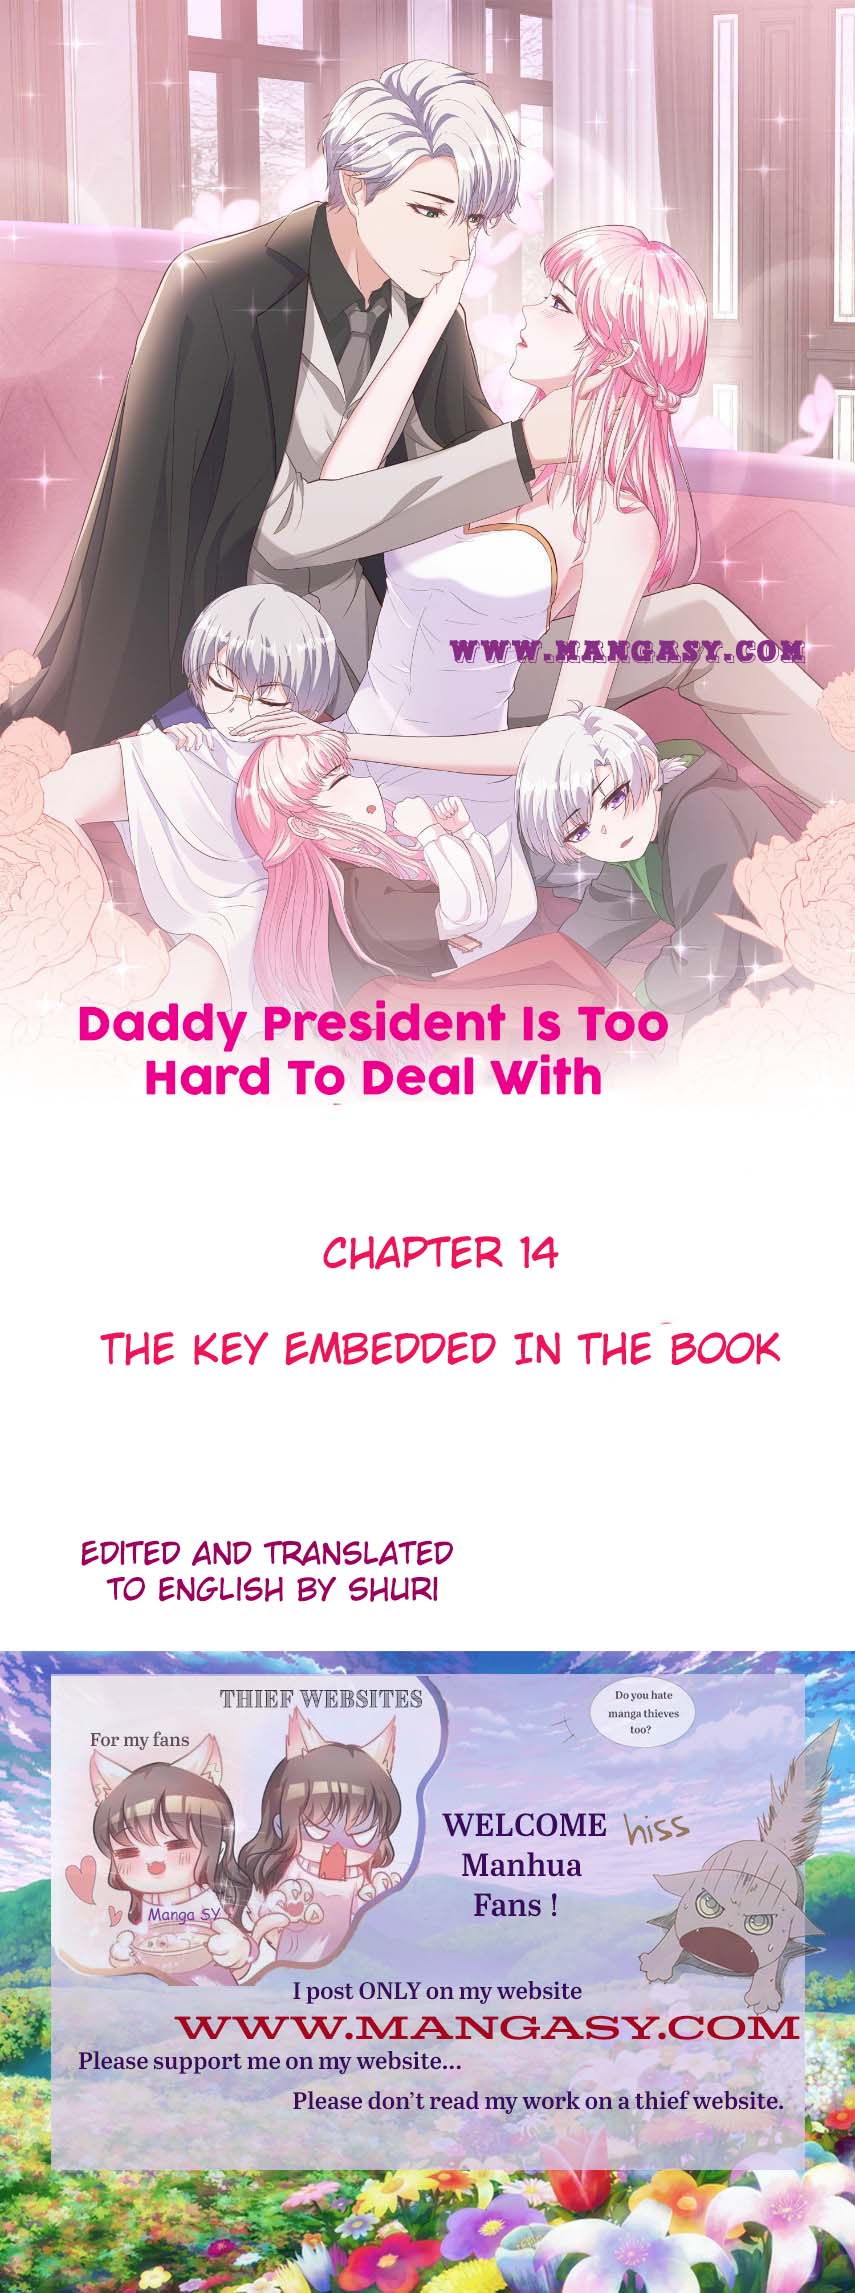 Daddy President Is Too Hard To Deal With - Page 1